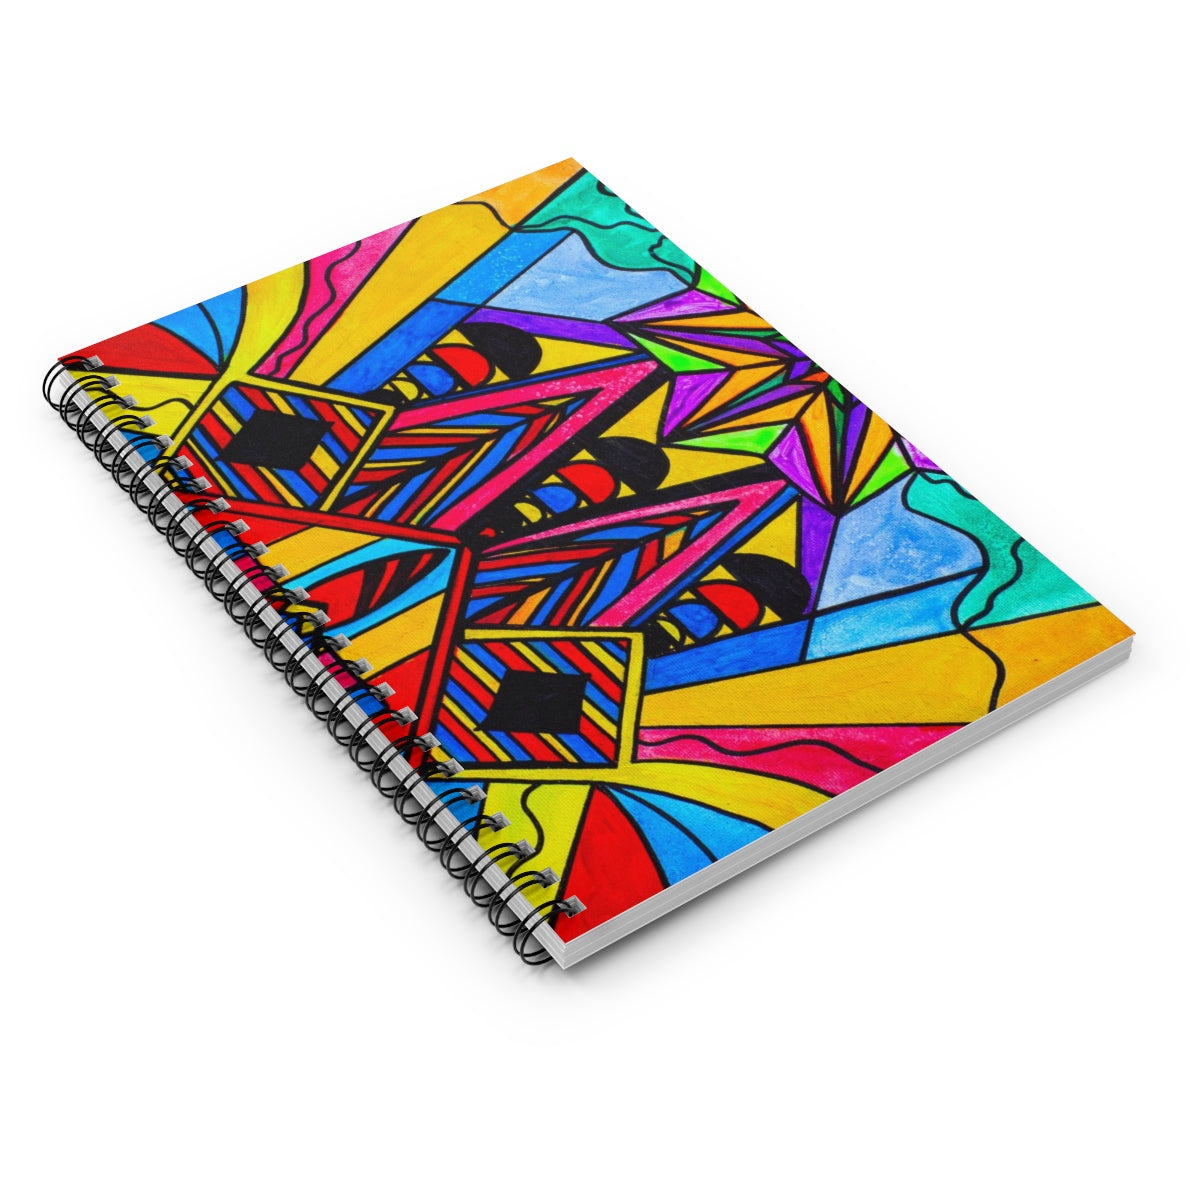 A Change In Perception - Spiral Notebook